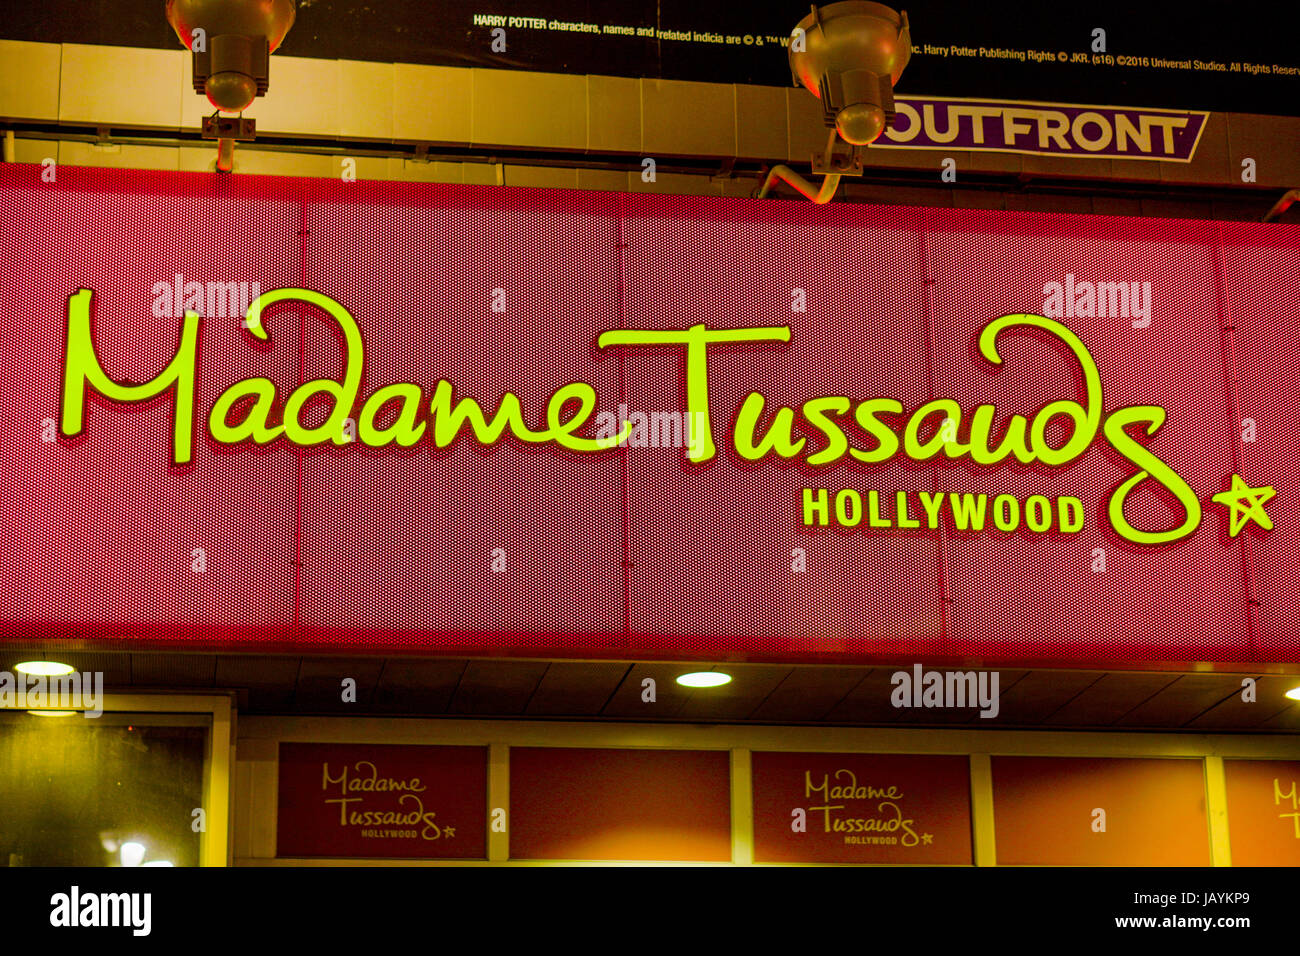 Madame Tussauds at Hollywood Boulevard in Los Angeles - LOS ANGELES - CALIFORNIA Stock Photo